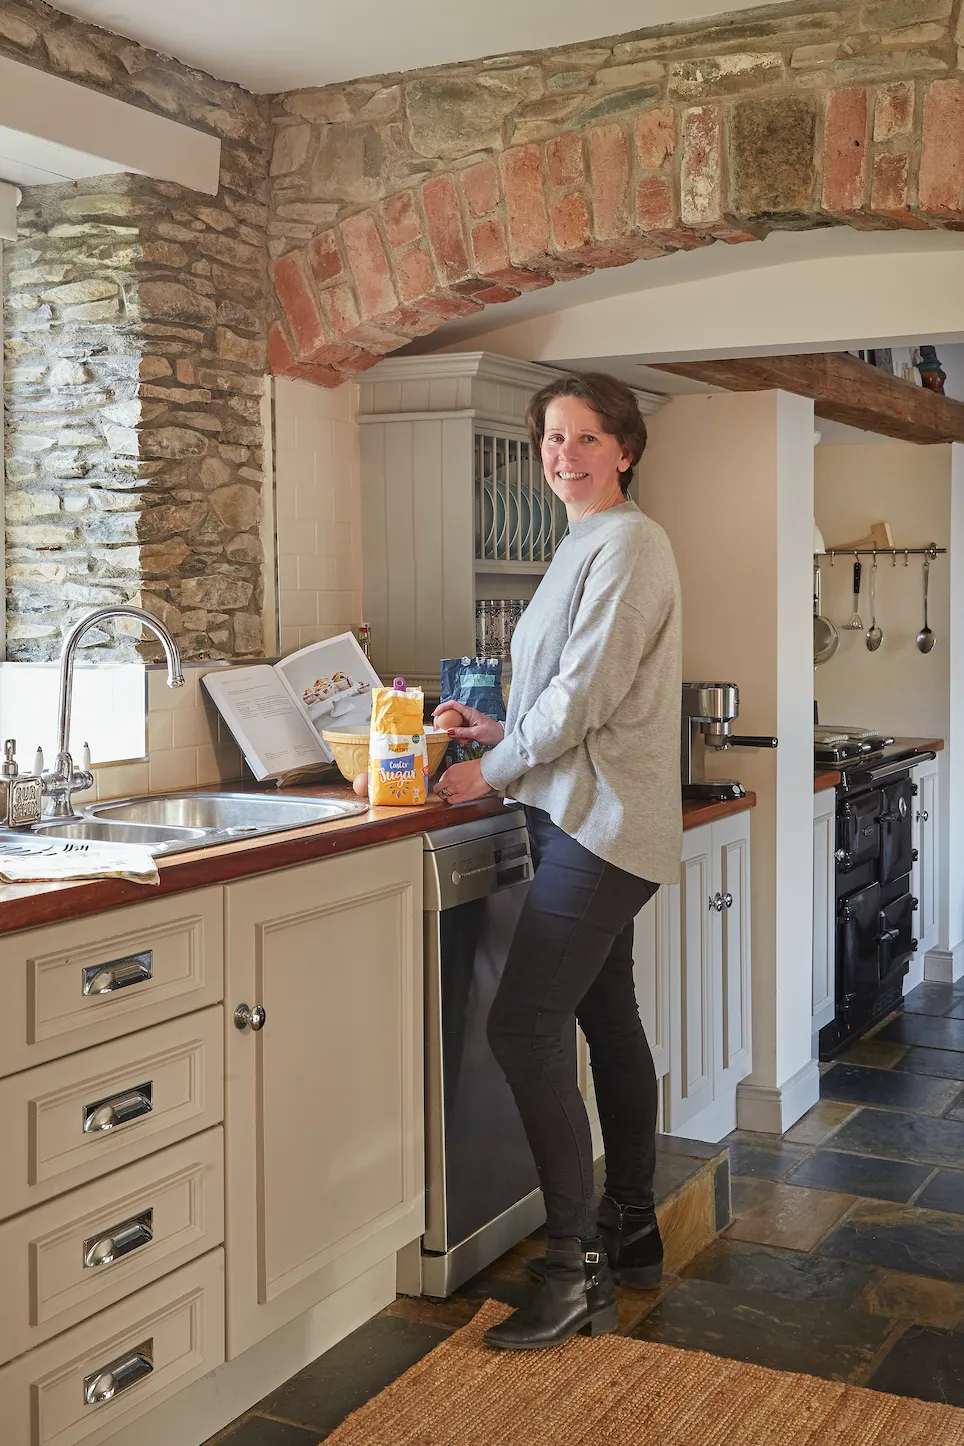 Real home: 'We worked all hours to transform this derelict farmhouse'